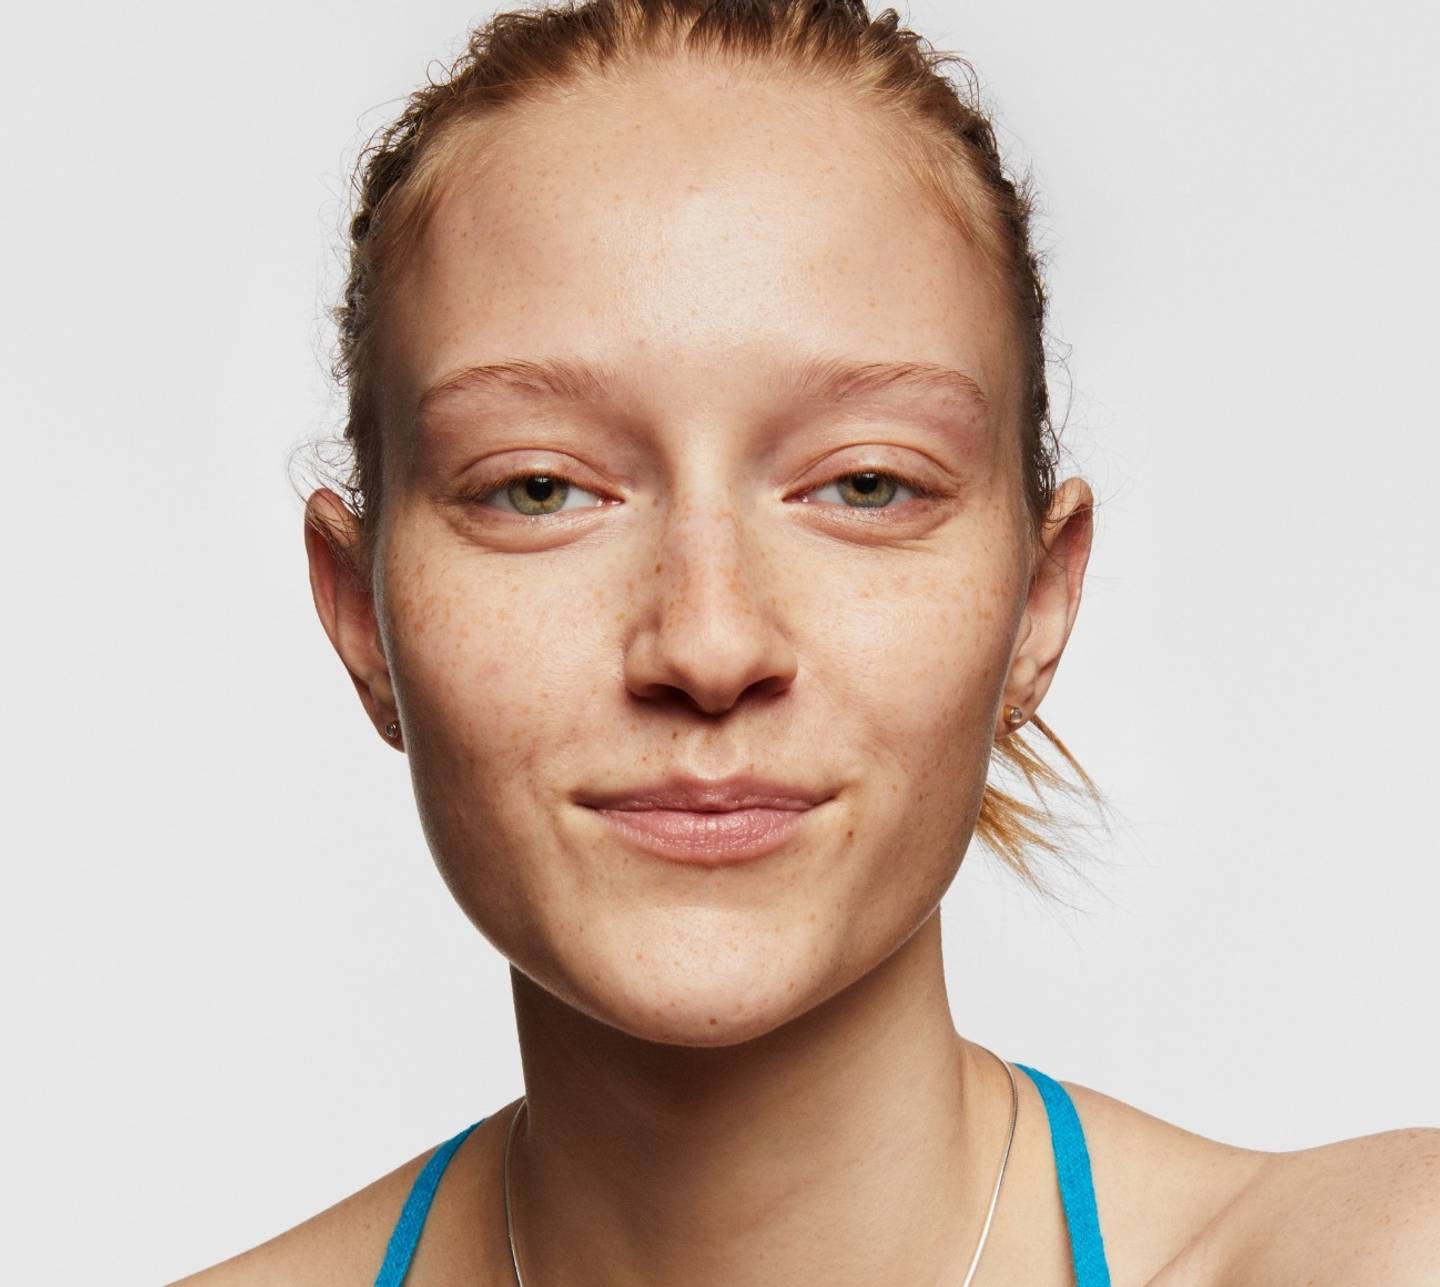 Fresh-faced model Chelsea with skin cleansed with Milk Makeup Hydro Ungrip Products